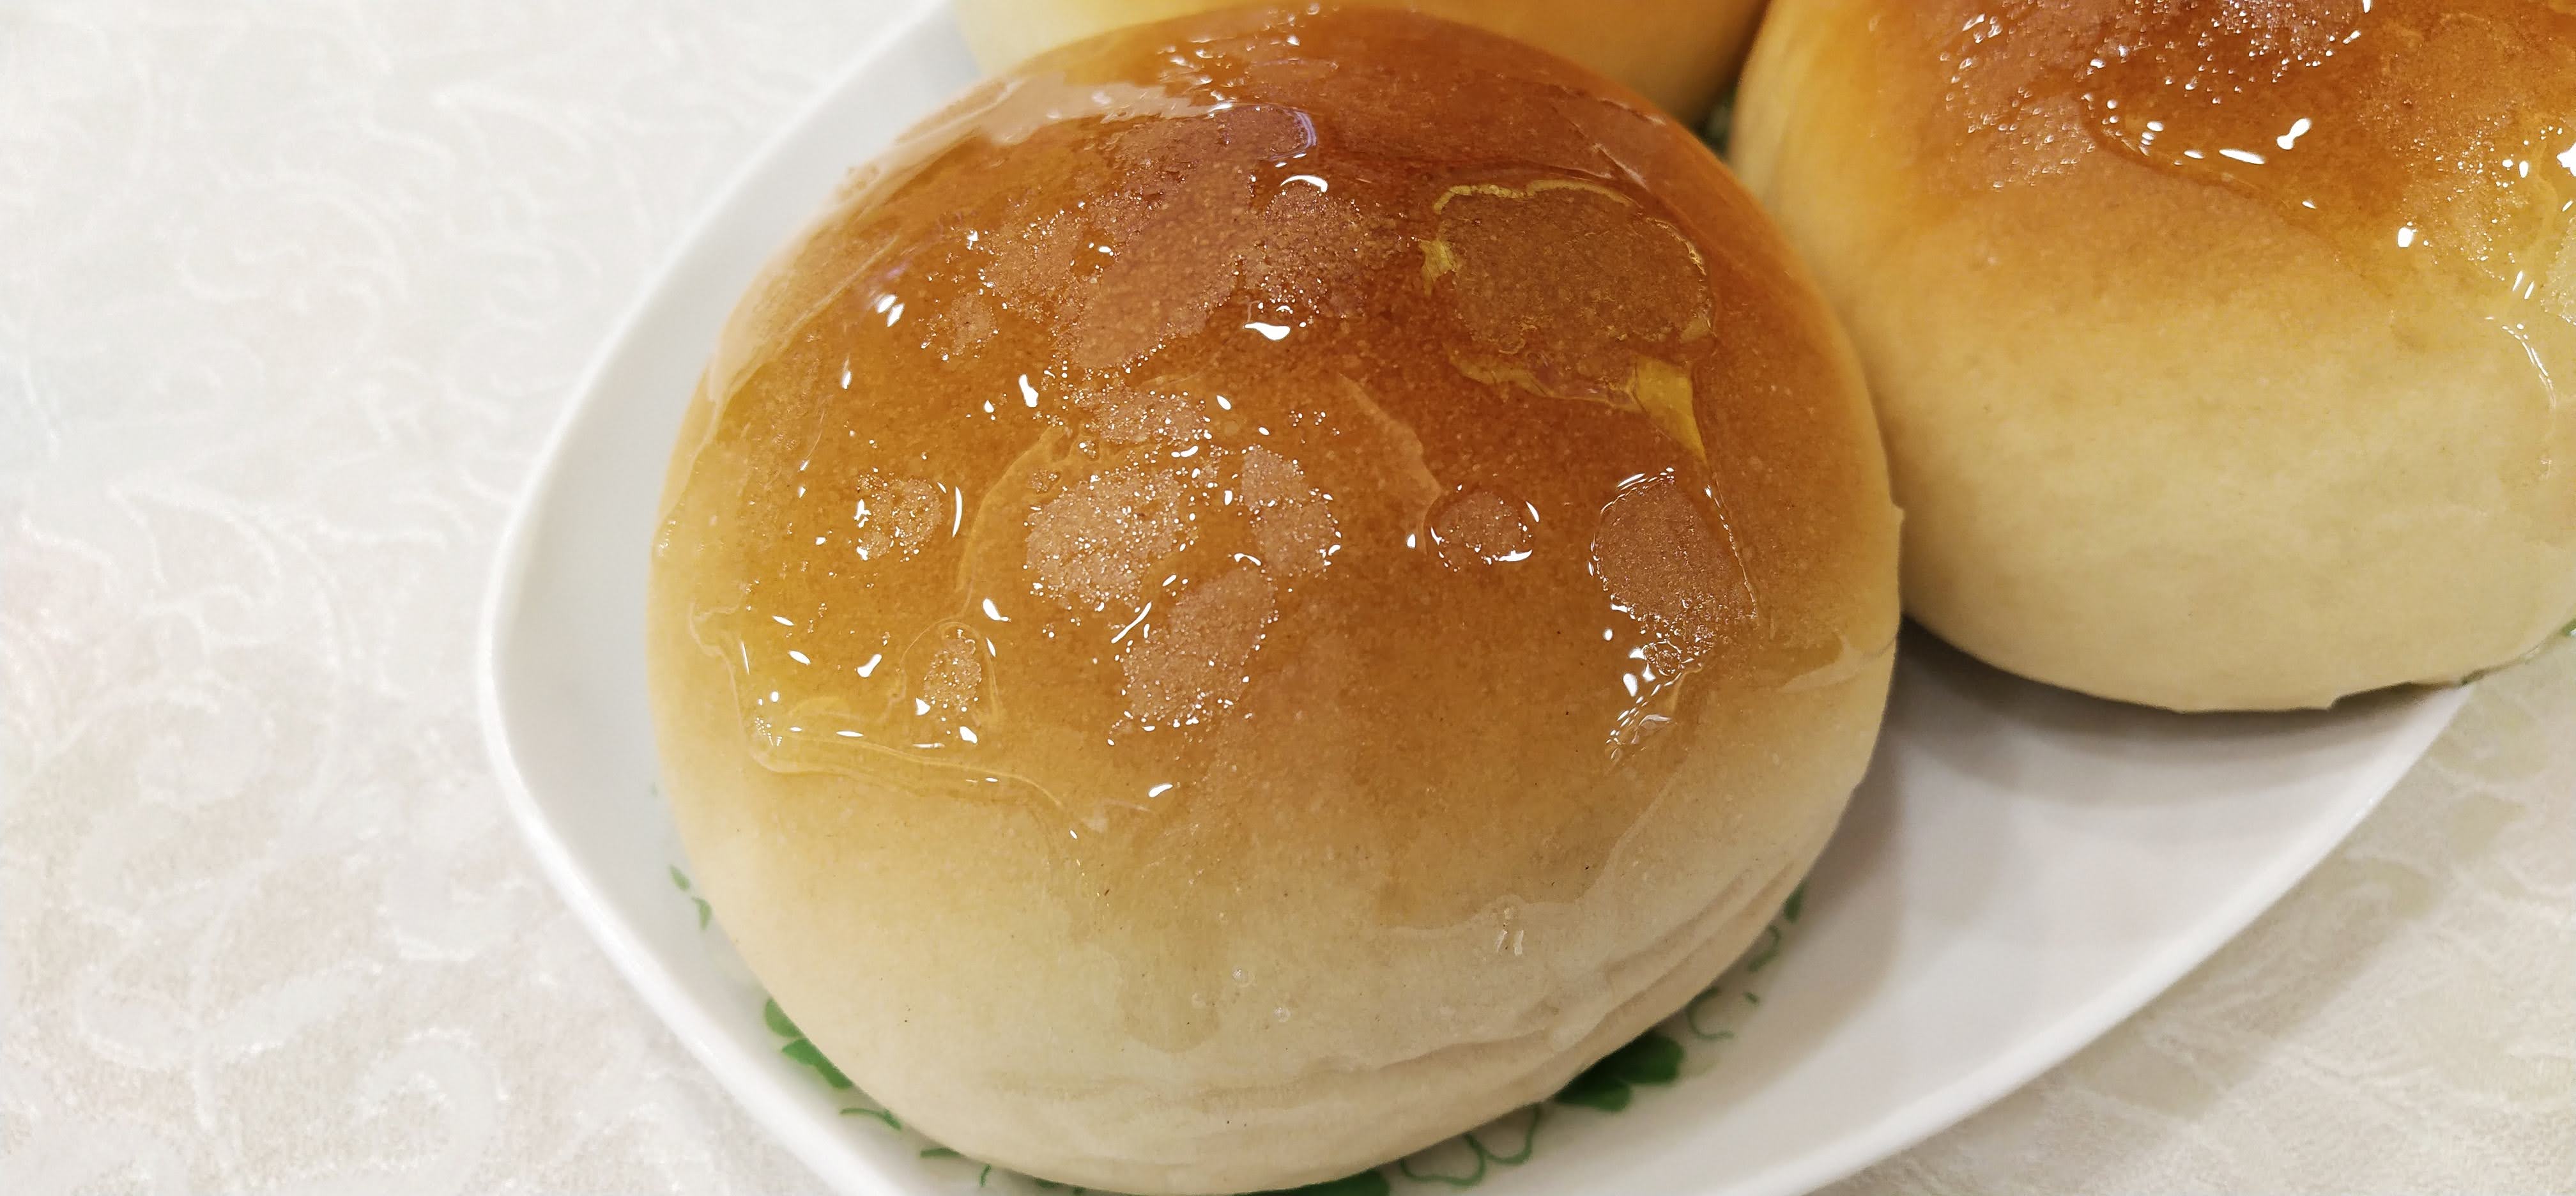 There is honey on the top of the bun